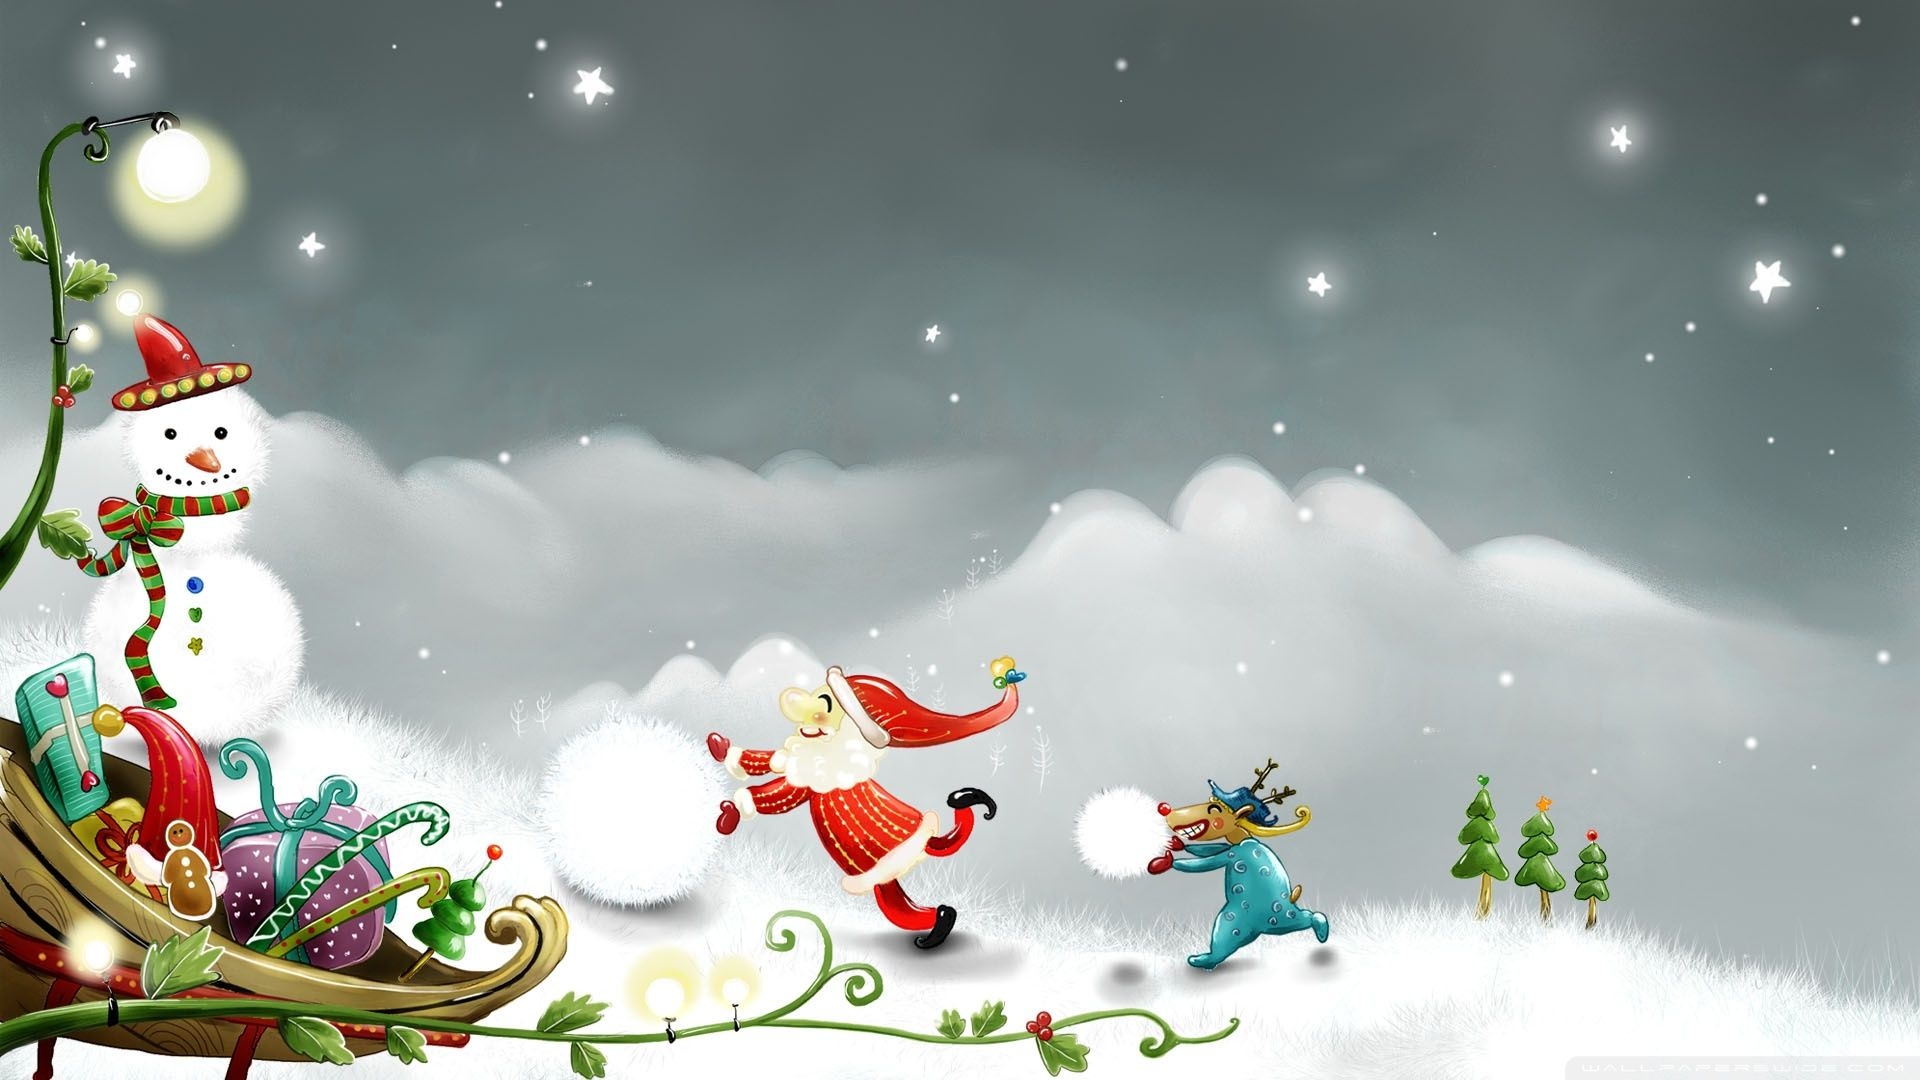 Free Animated Christmas Wallpaper For Android - Free Christmas Wallpaper Backgrounds , HD Wallpaper & Backgrounds